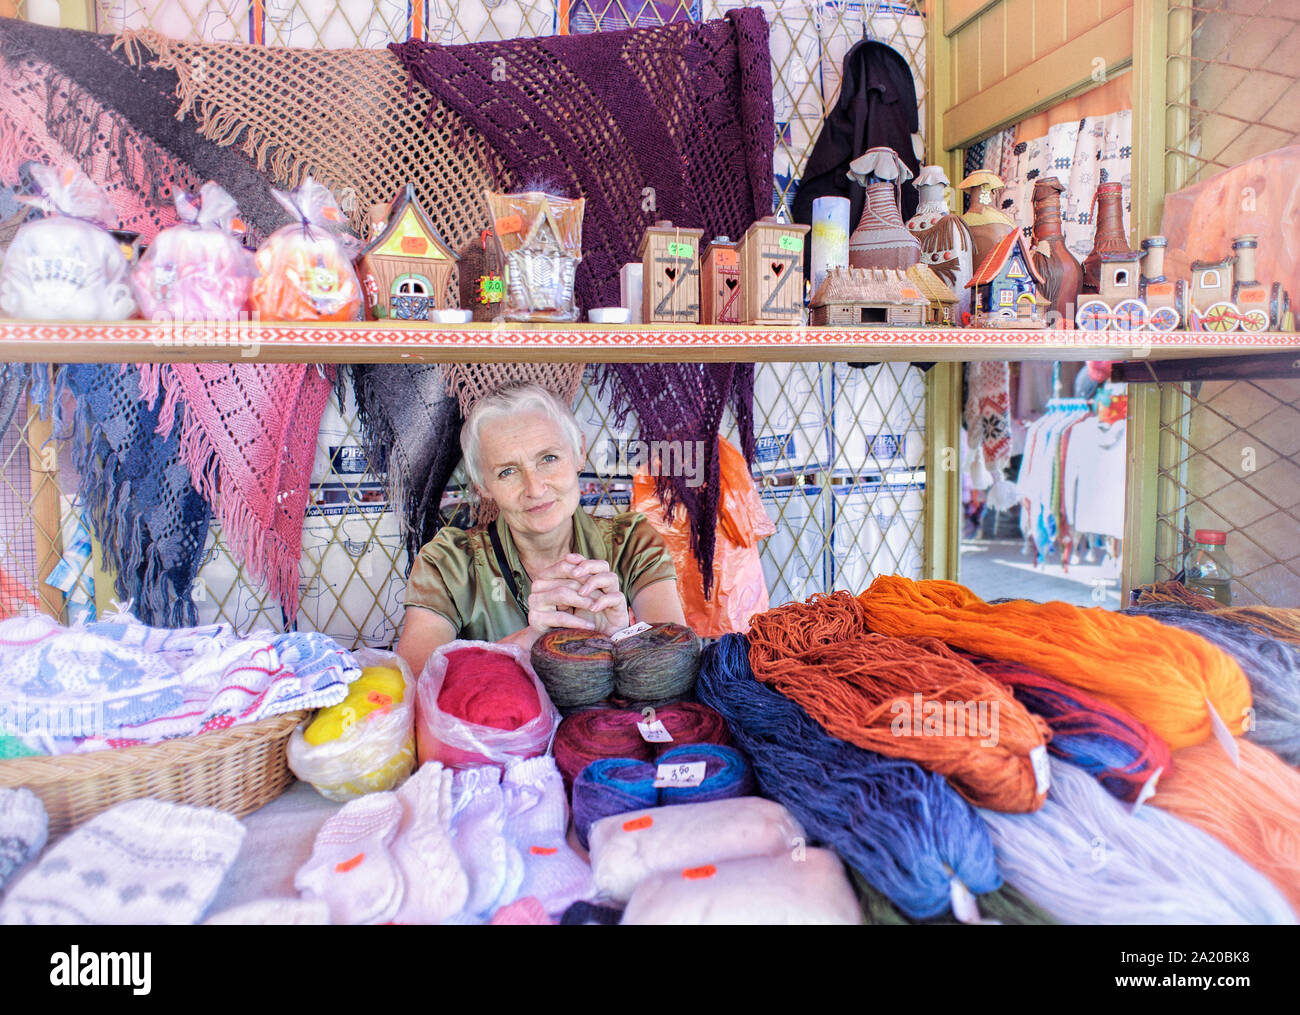 Environmental portrait of beautiful Estonian shopkeeper in the marketplace Tallinn, Estonia with souvenirs, wool, woolen goods and crafts for sale. Stock Photo